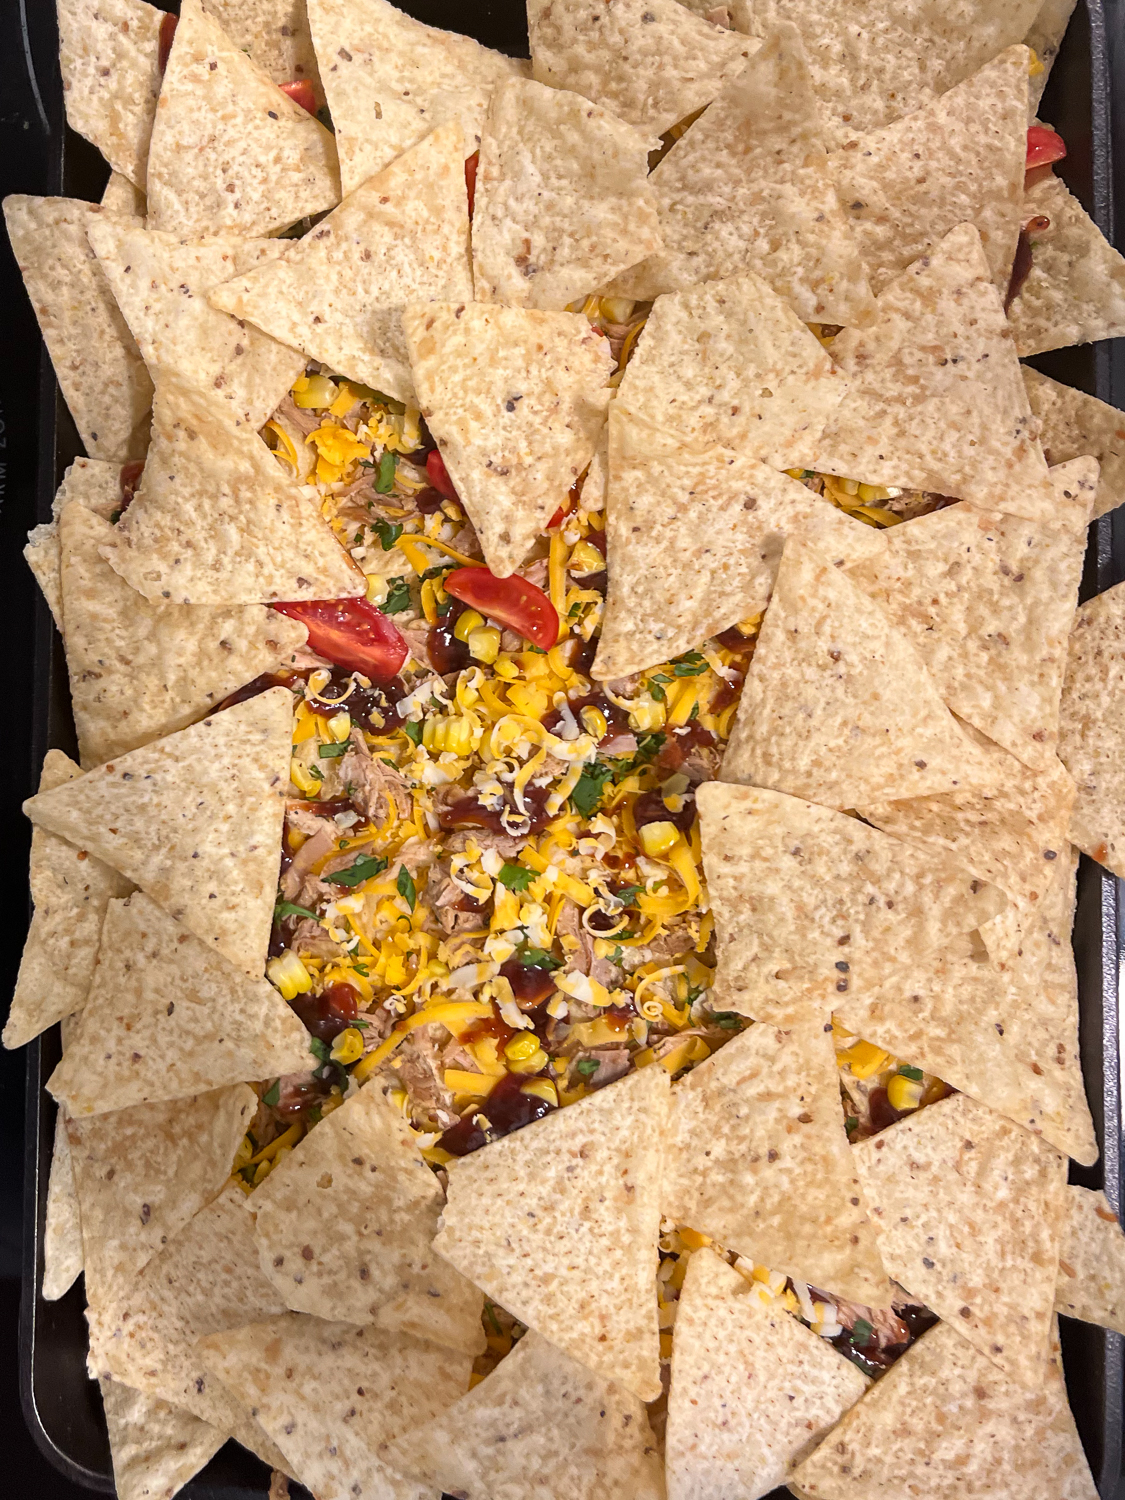 A second layer of chips is added atop the first completed layer of nachos.